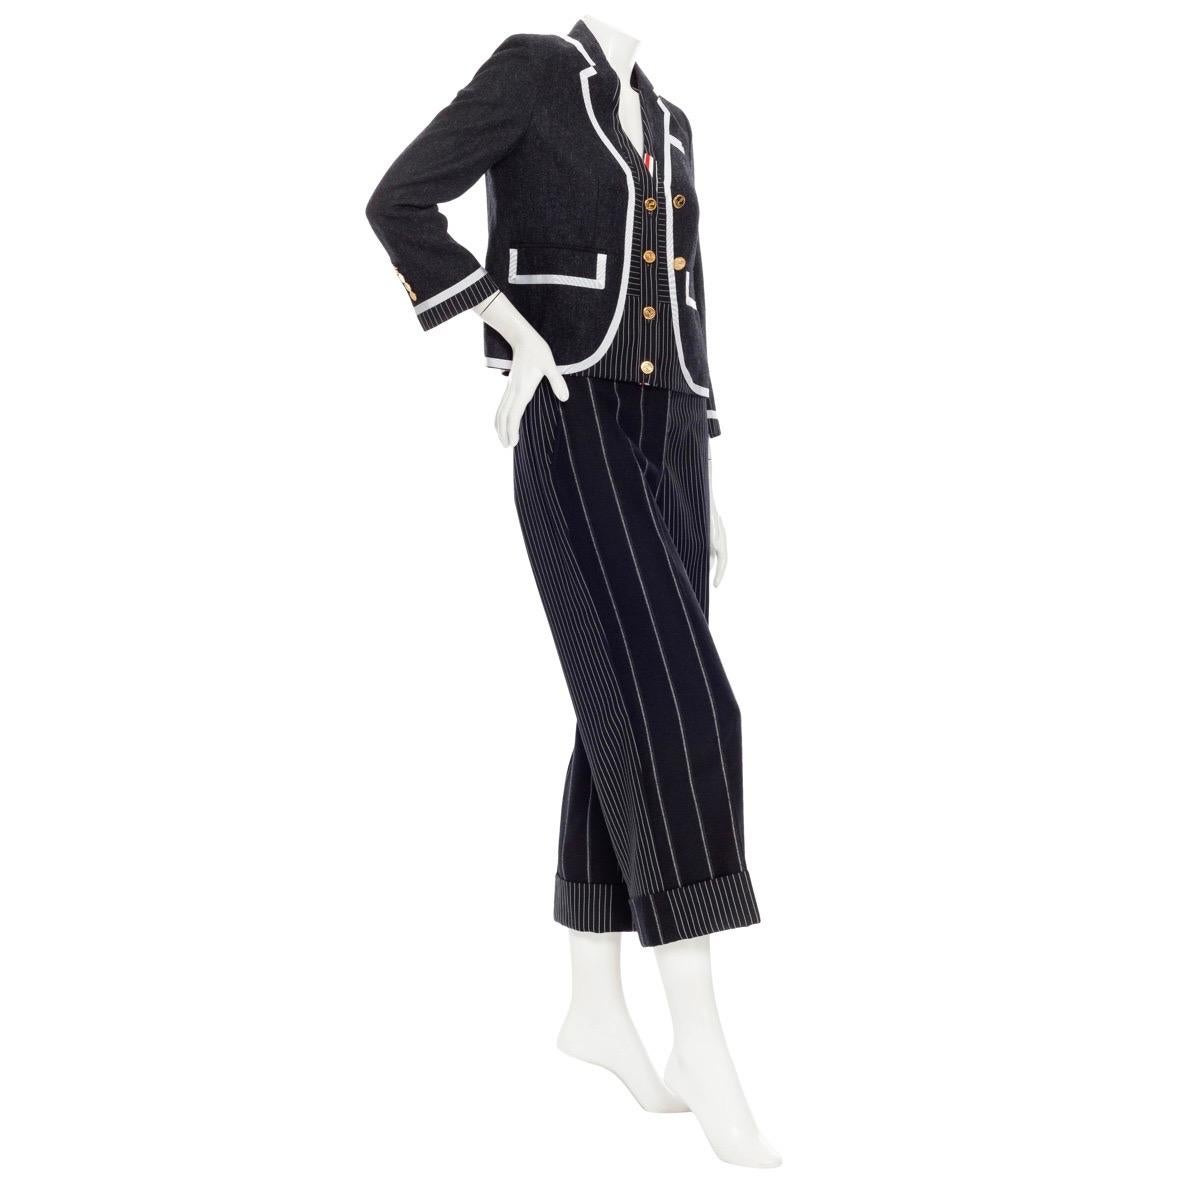 Thom Browne Navy Wool Pinstriped Jacket and Pants Suit

Includes suit jacket and pants
Navy/White
Pinstriped
Jacket features contrasting white grosgrain trim, a notched collar, two front patch pockets, a welt pocket, gold-tone anchor embossed